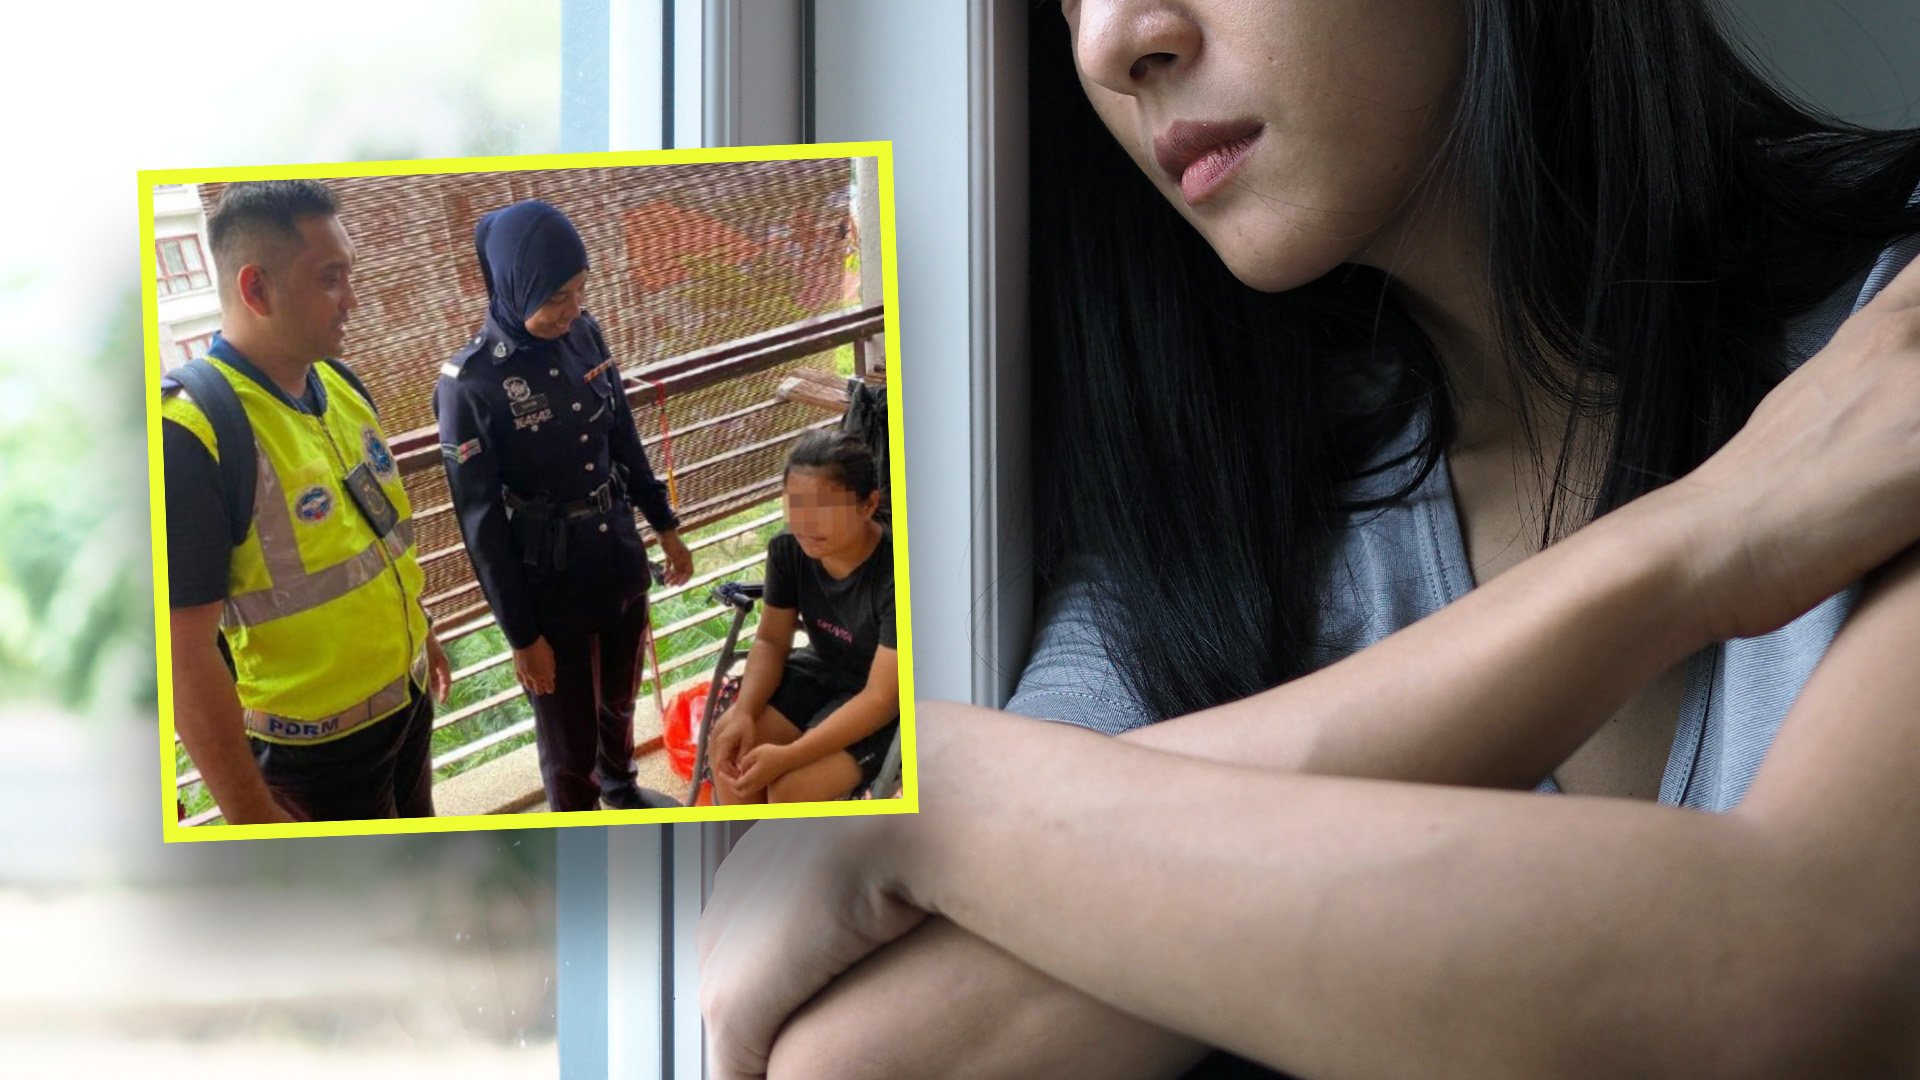 An Indonesian maid in Malaysia who was forced to live on an exposed balcony had to be rescued after she threw an SOS note down onto the street. Photo: SCMP composite/Shutterstock/Royal Malaysia Police